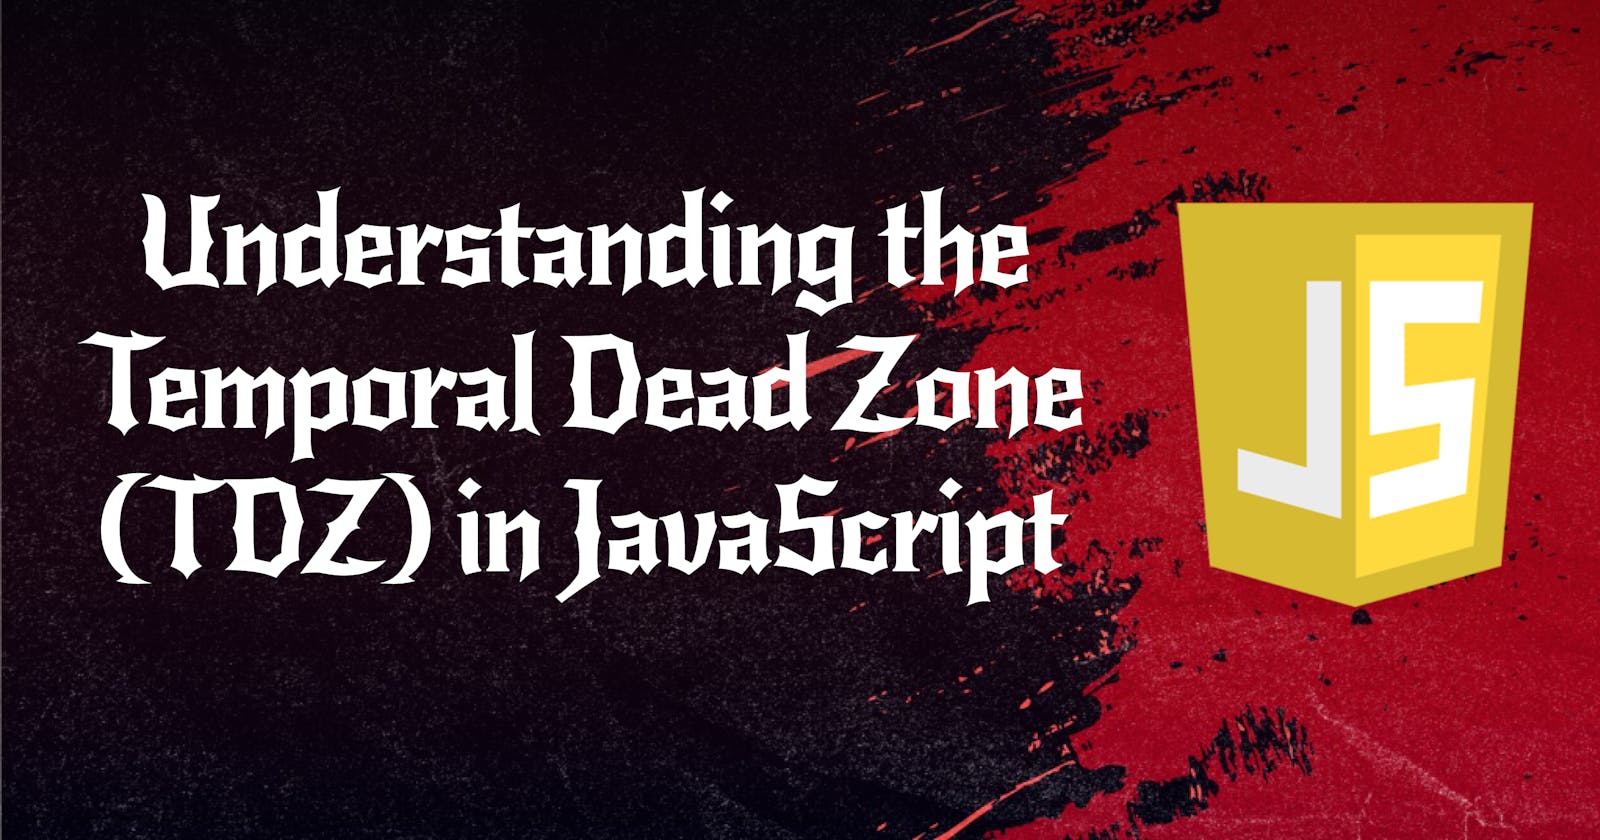 Understanding the Temporal Dead Zone (TDZ) in JavaScript: What it is and How to Avoid Errors